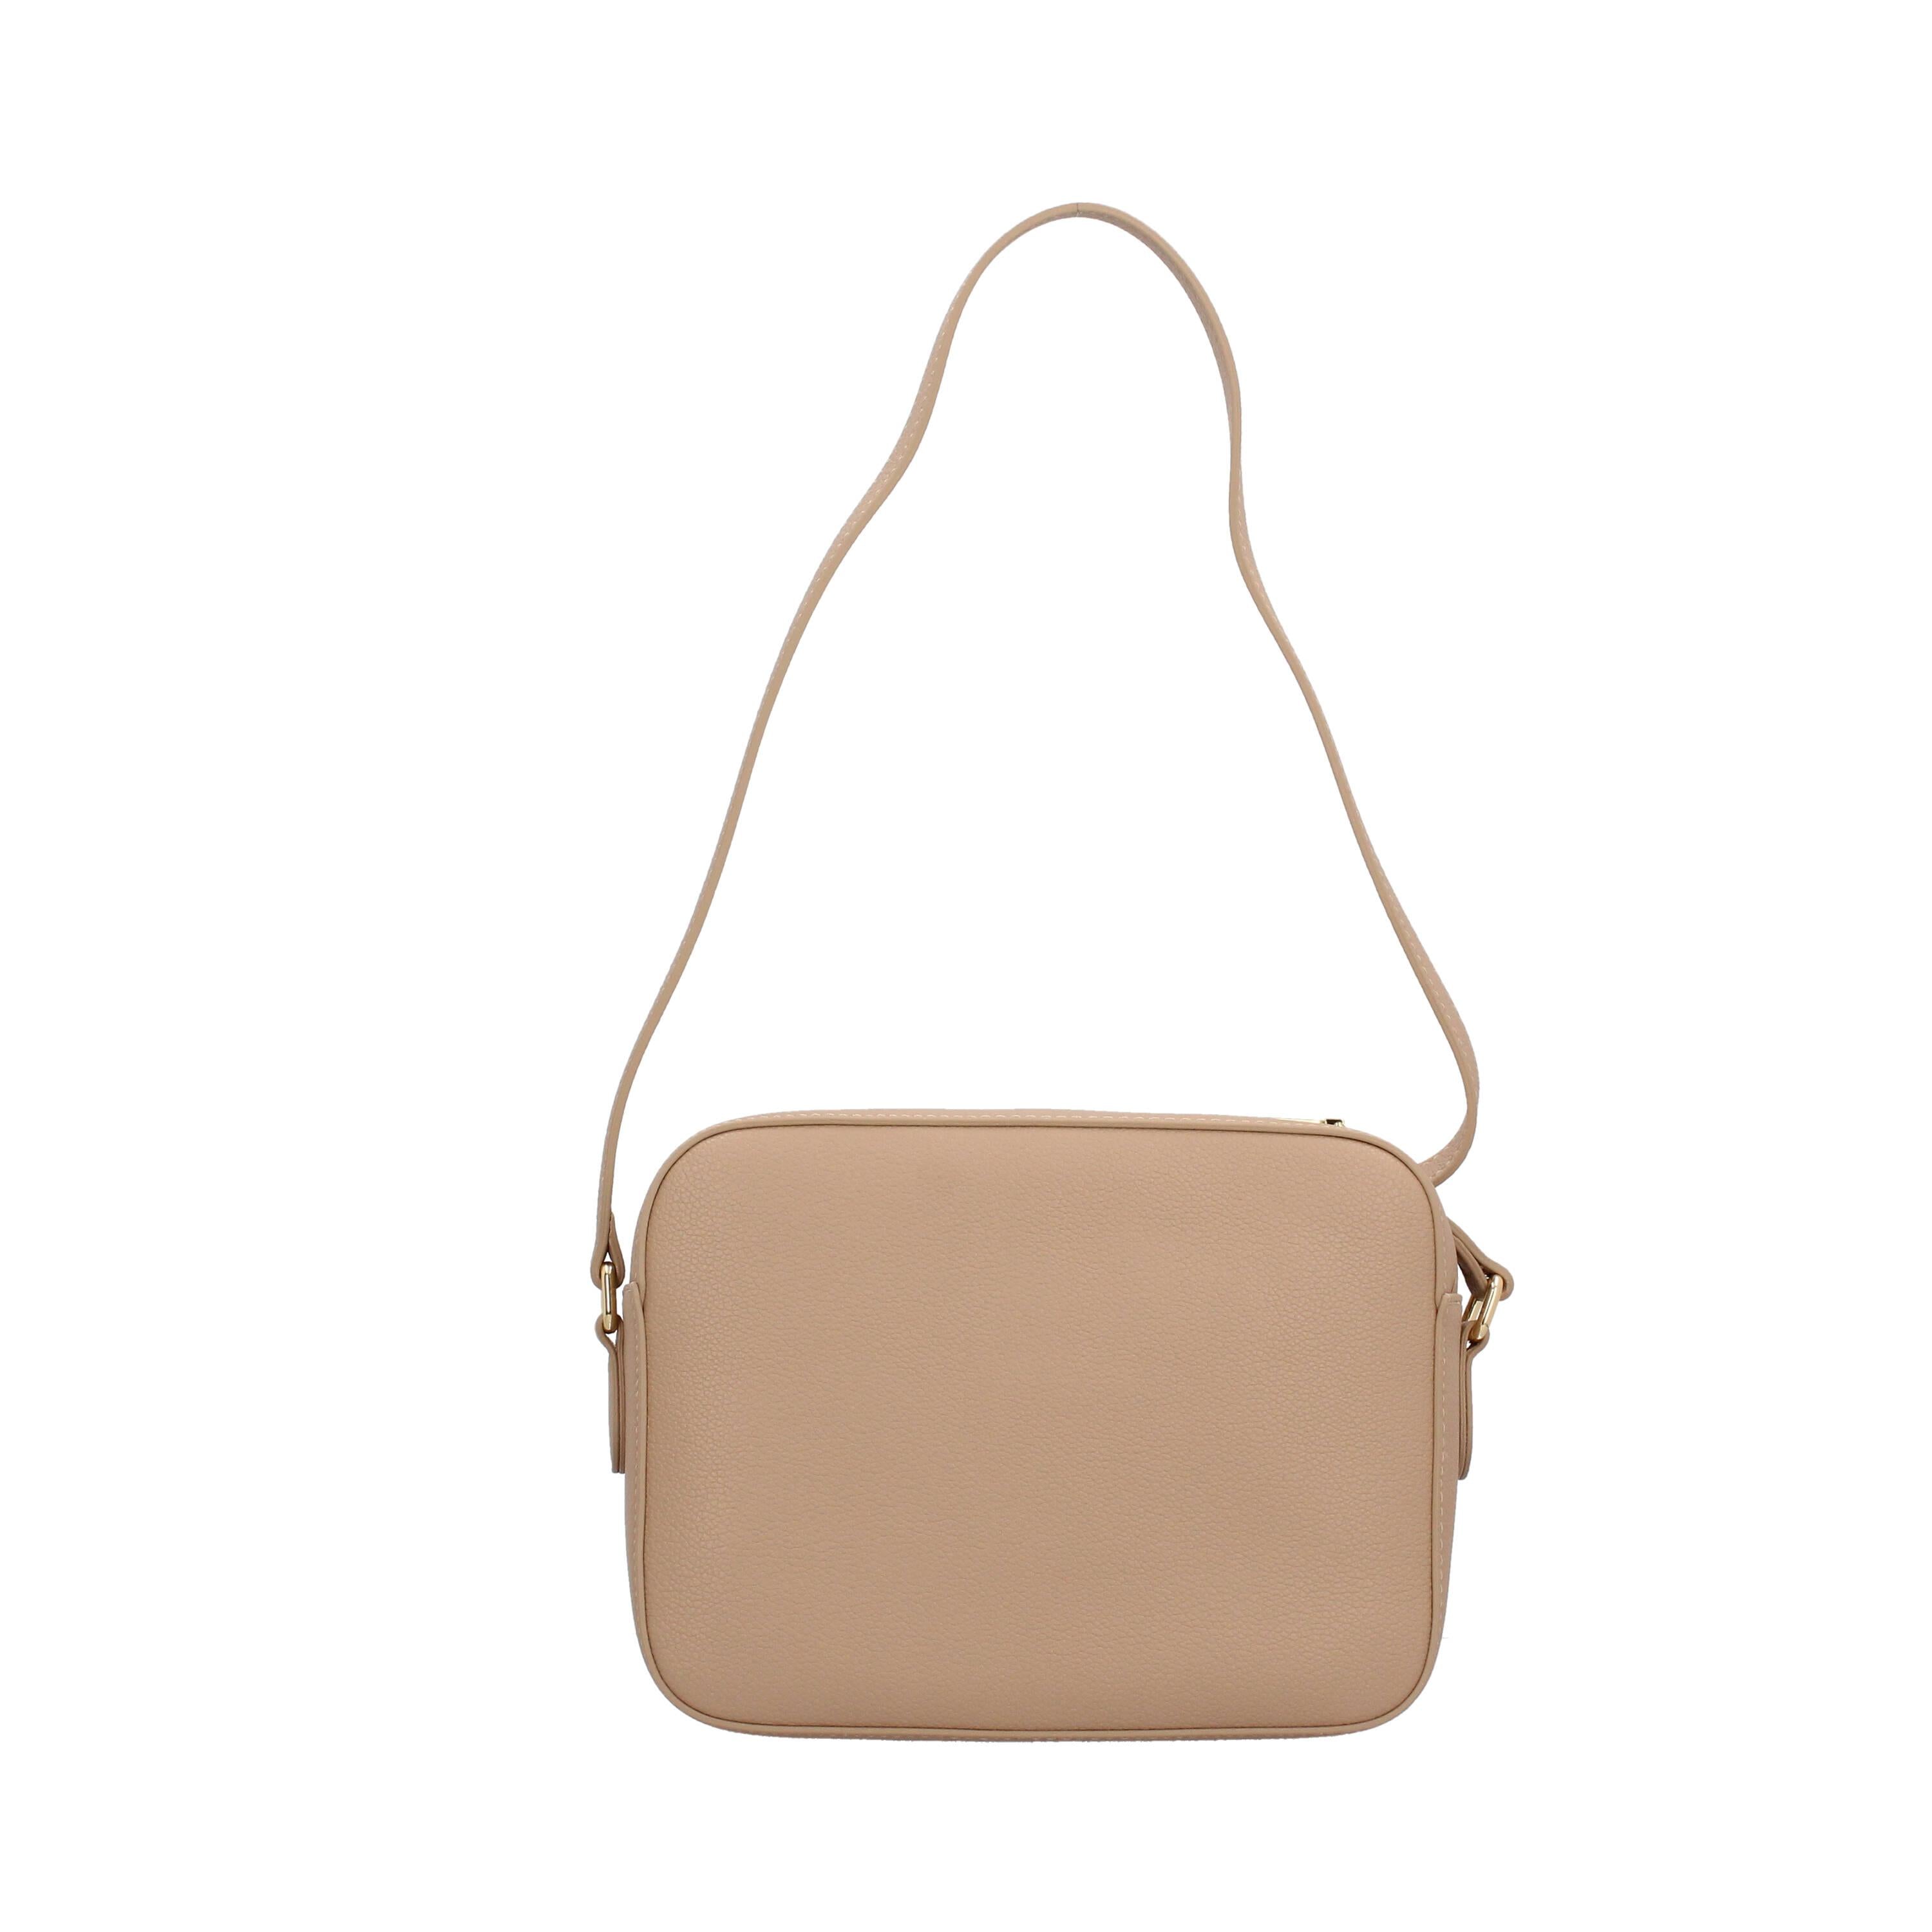 Love Moschino Borsa a tracolla taupe JC4405PP0FKP0209